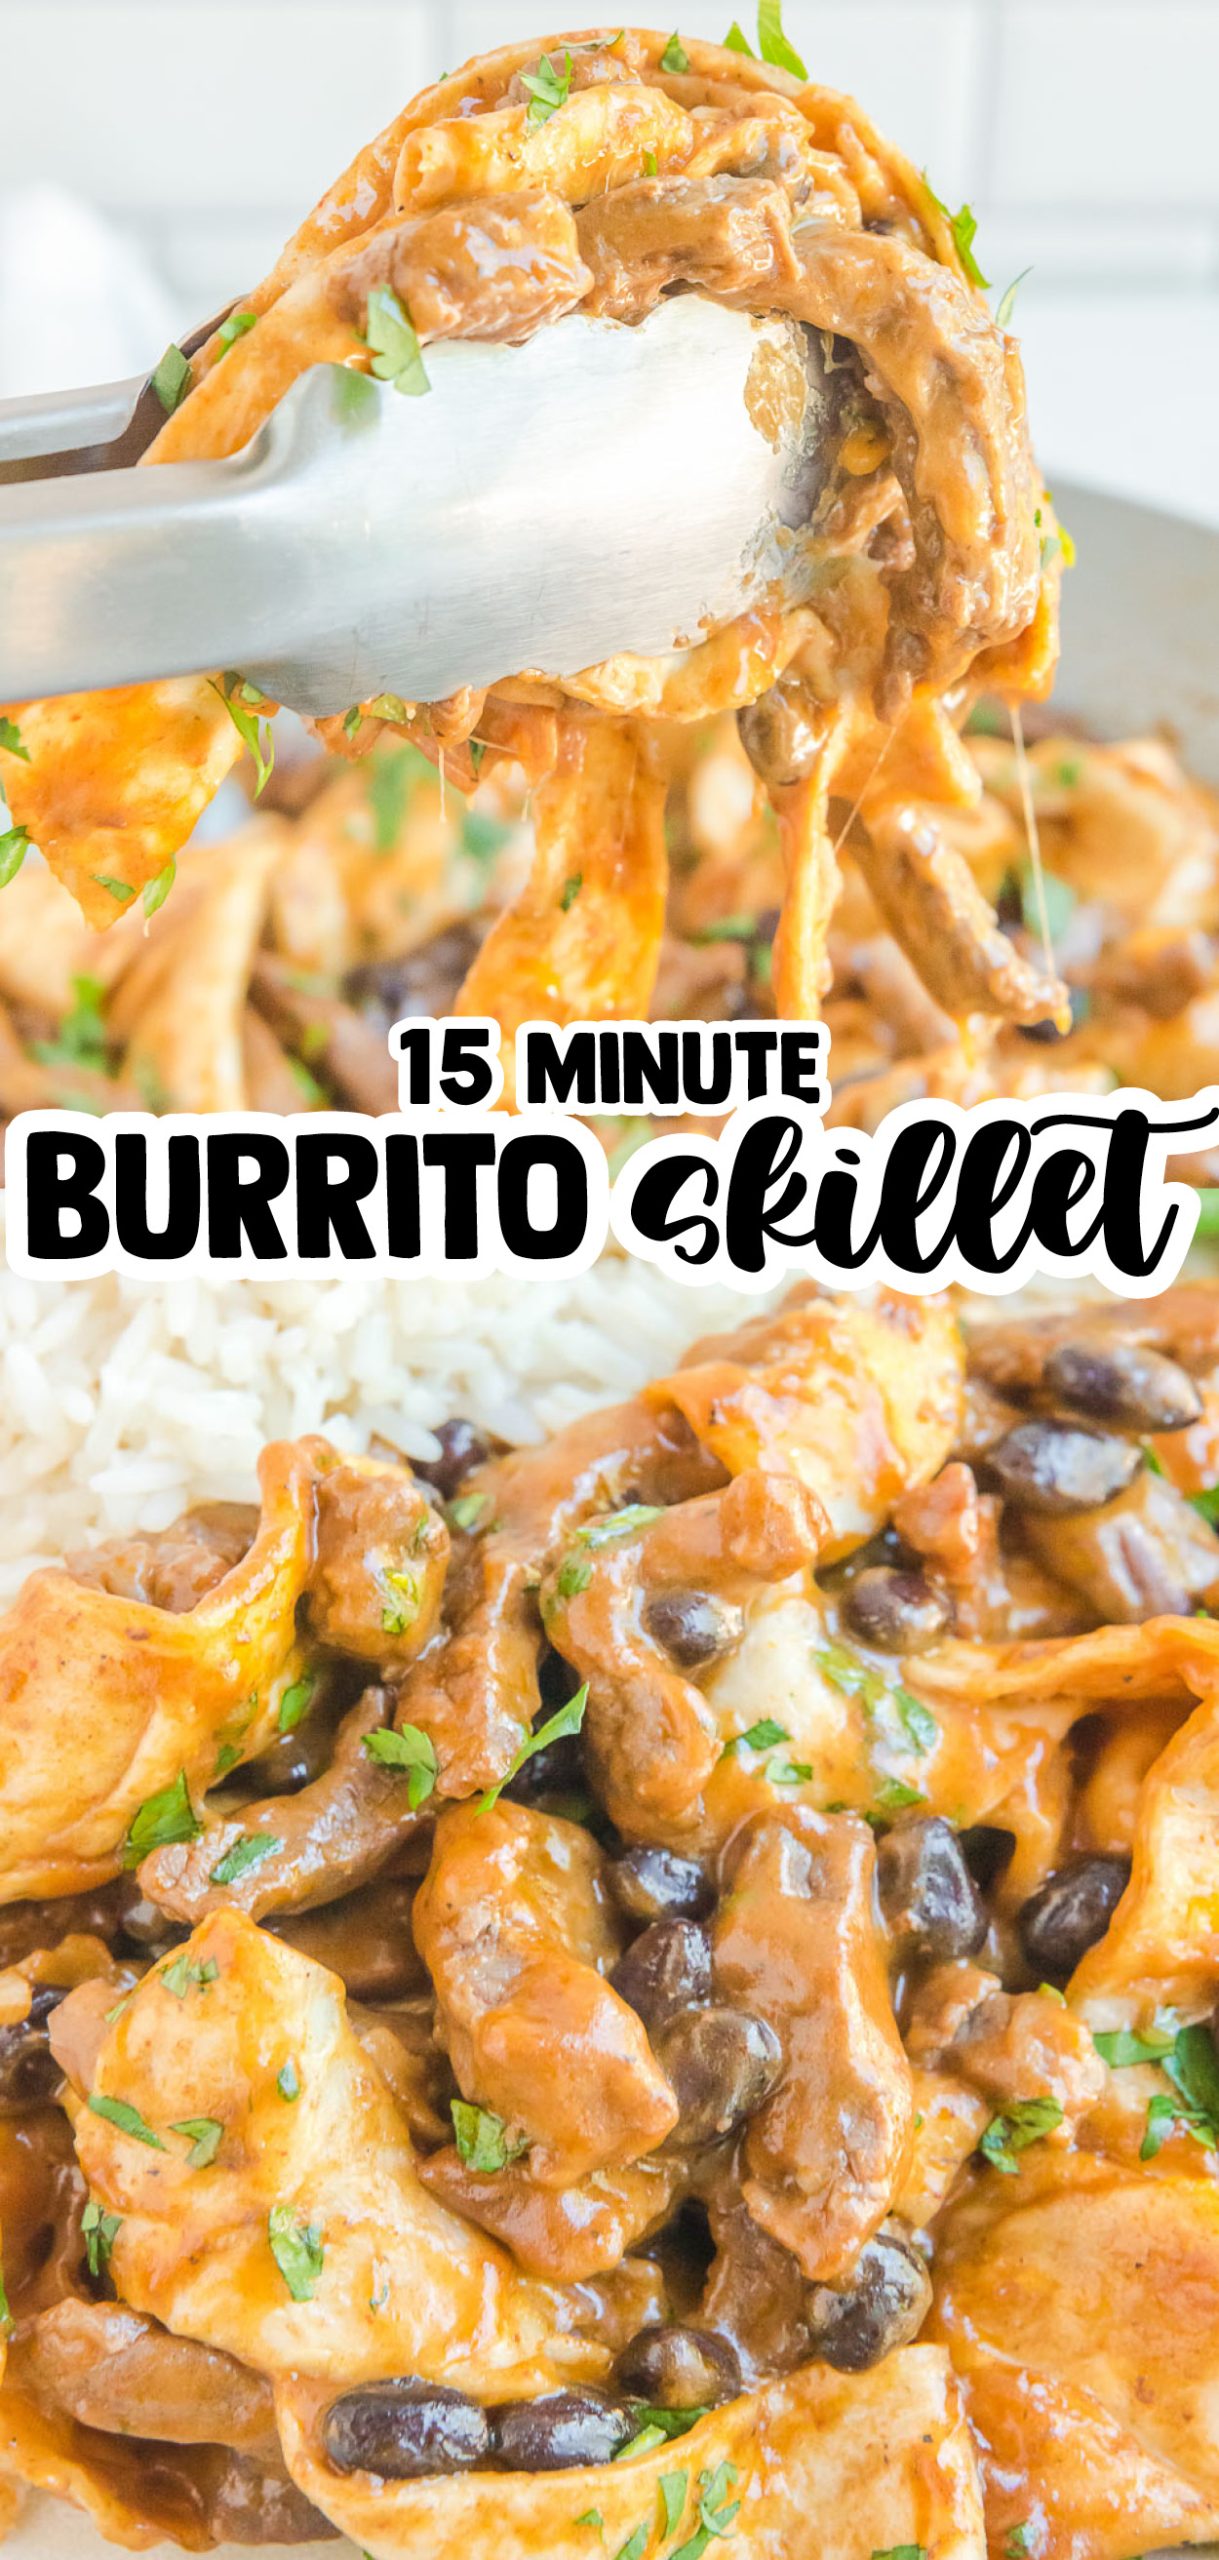 This 15-minute Burrito Skillet has sirloin steak, black beans, a creamy sauce, and tortillas all cooked in one skillet. 